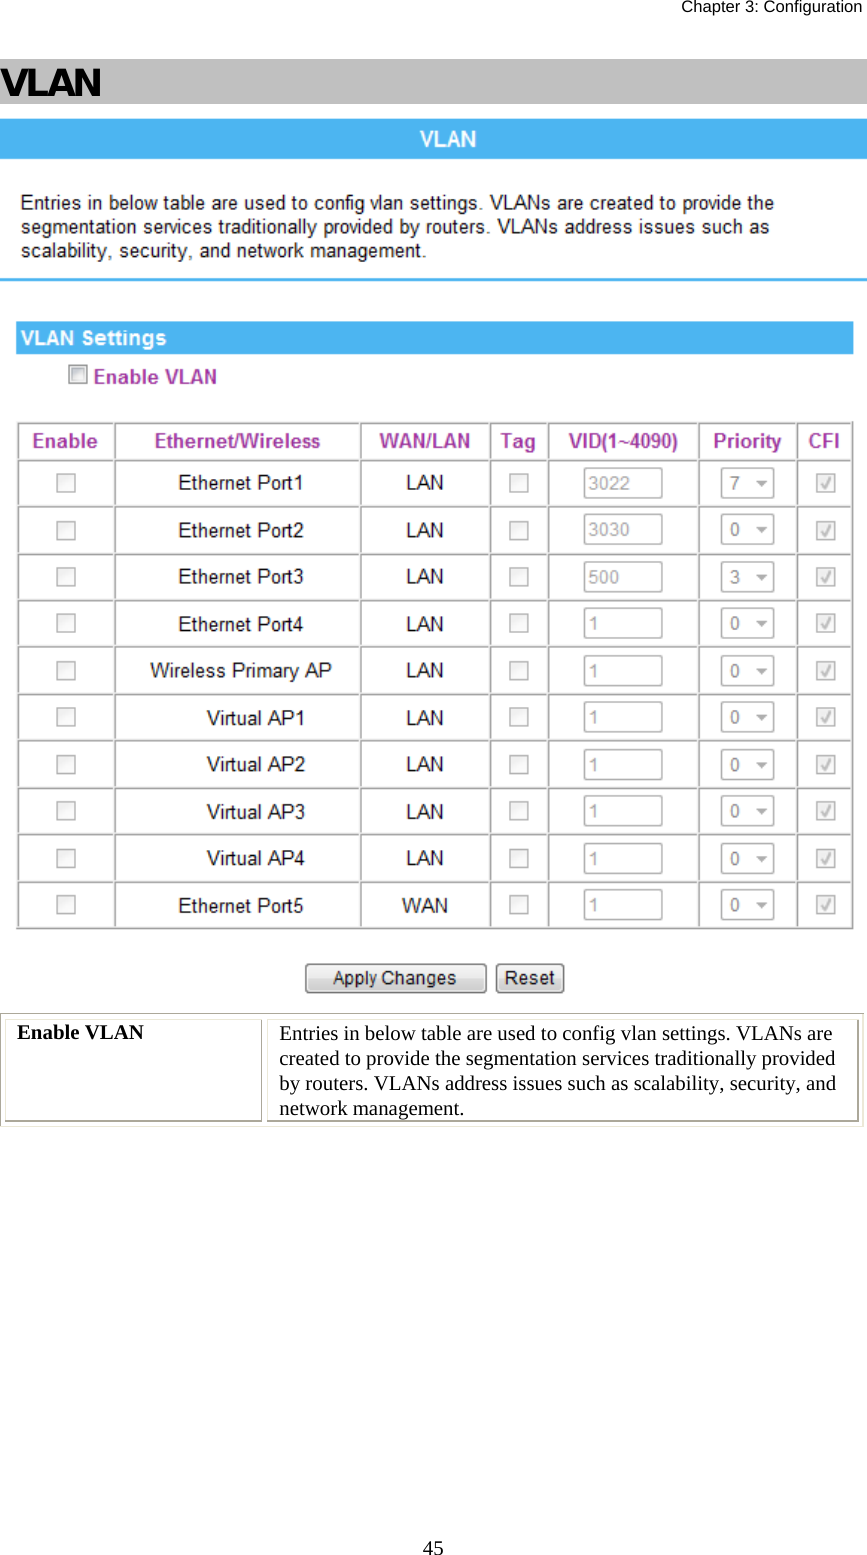   Chapter 3: Configuration  45VLAN  Enable VLAN  Entries in below table are used to config vlan settings. VLANs are created to provide the segmentation services traditionally provided by routers. VLANs address issues such as scalability, security, and network management.       